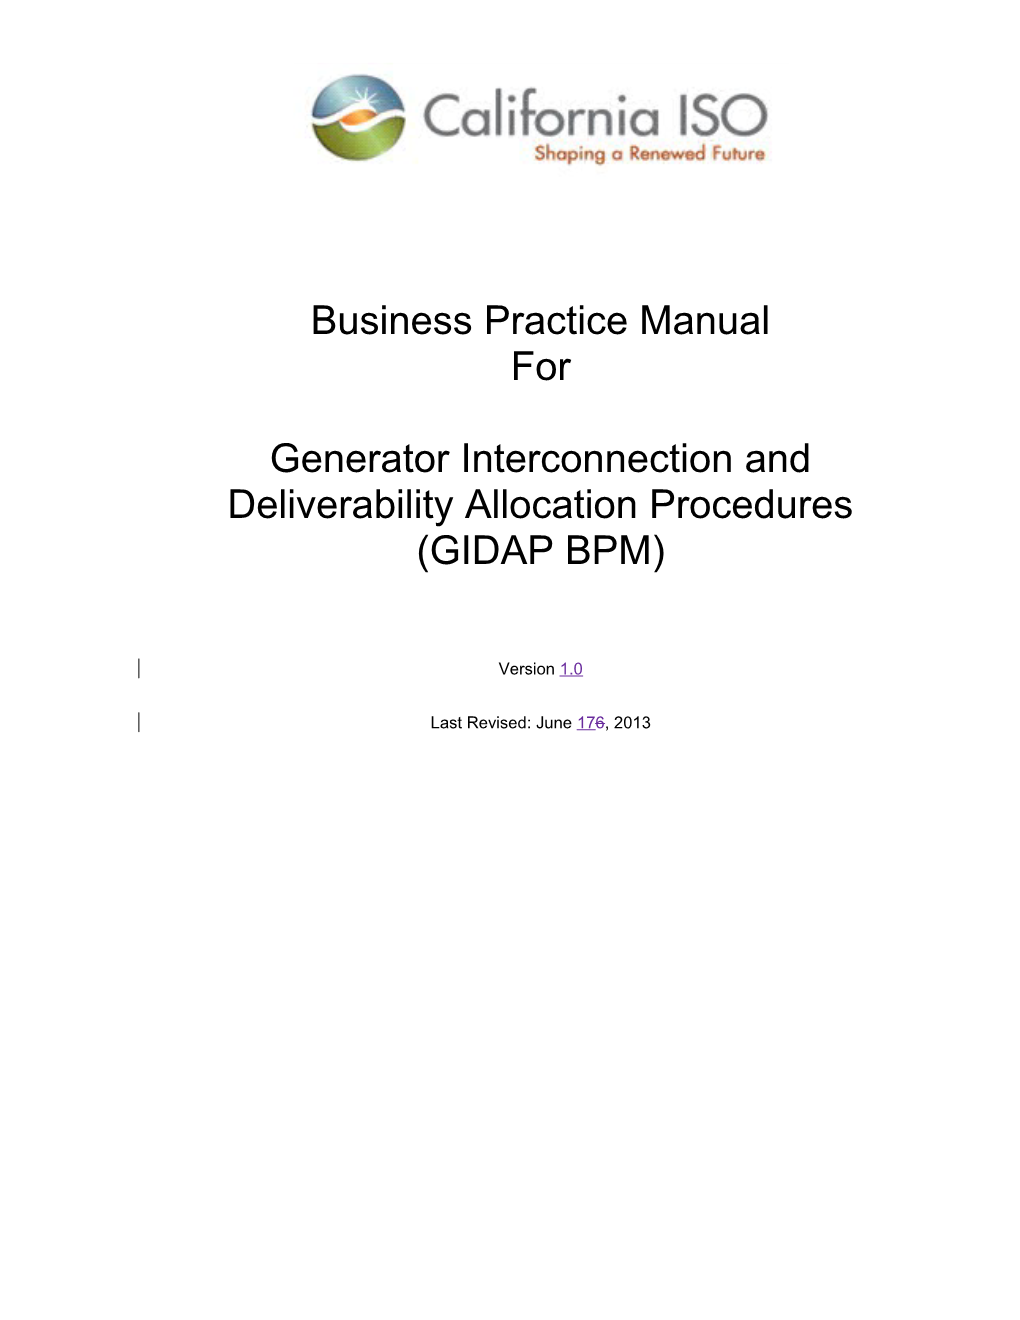 CAISO Business Practice Manual BPM for the Generator Interconnection and Deliverability